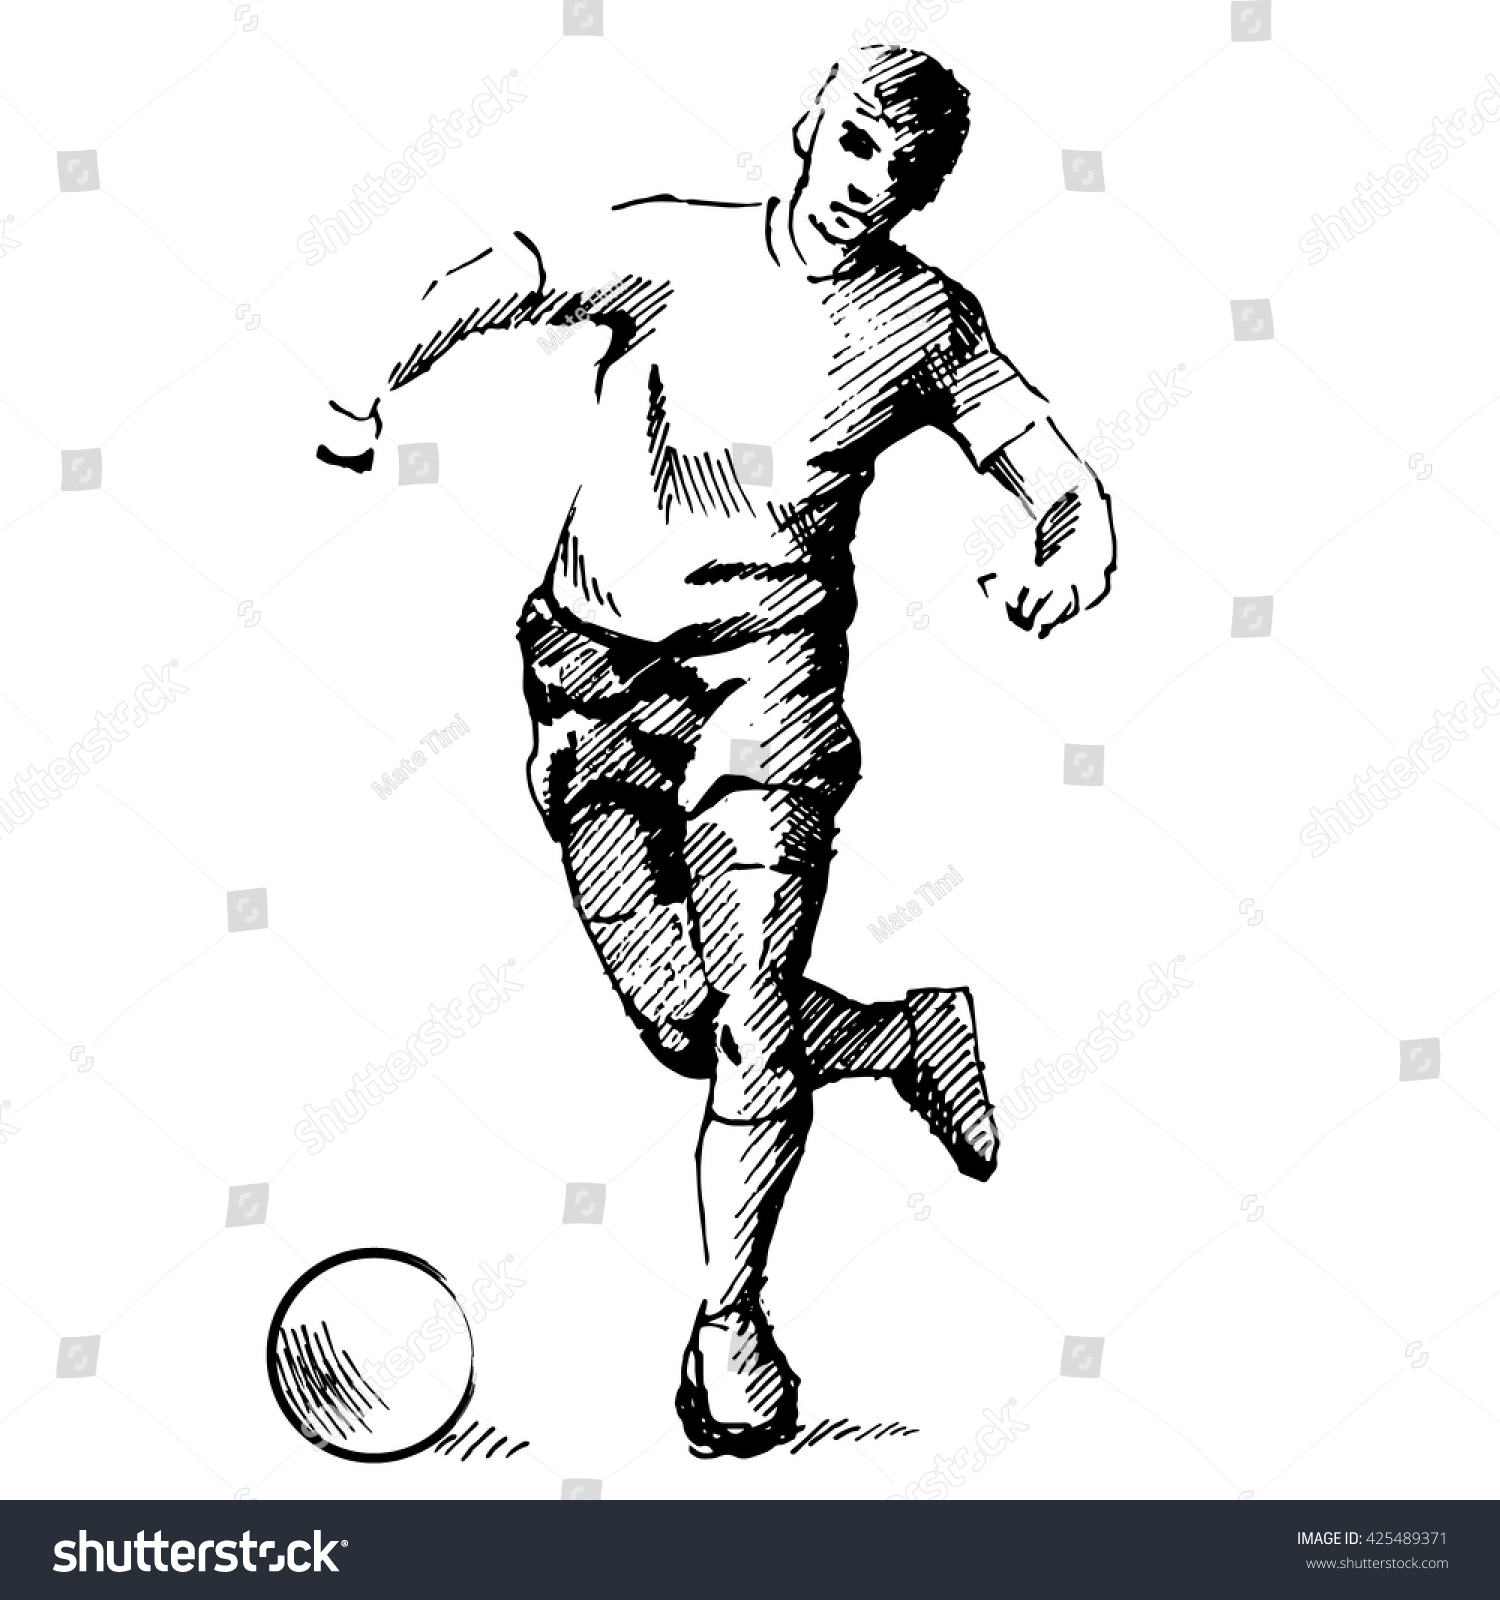 Soccer Player, Hand Made Drawing Over White Background Stock Vector ...